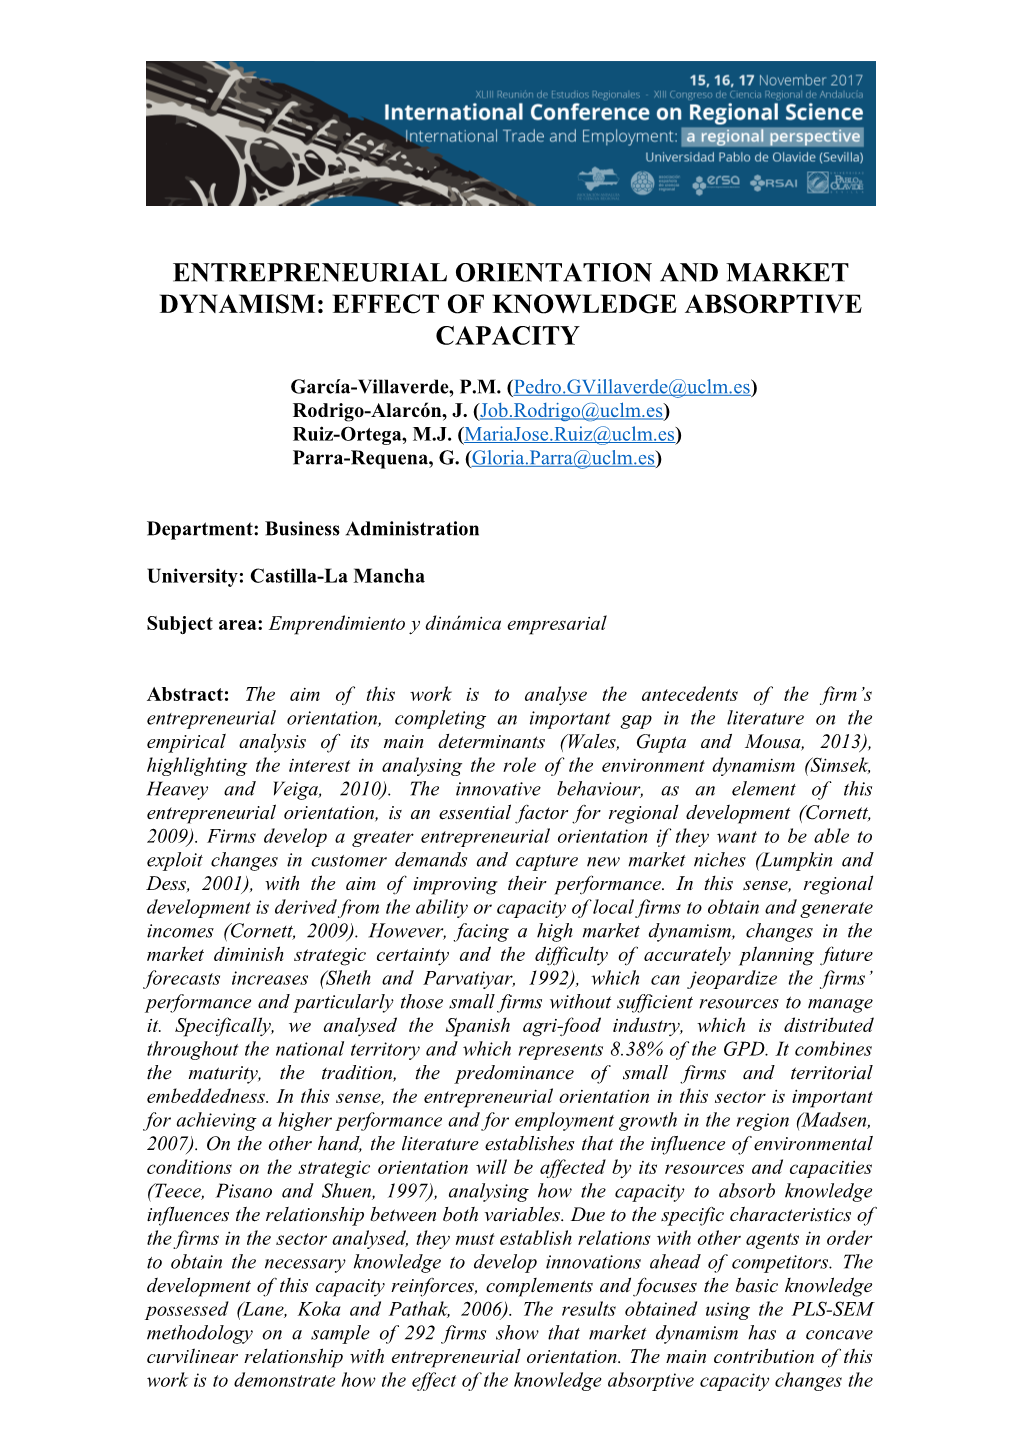 Entrepreneurial Orientation and Market Dynamism: Effect of Knowledge Absorptive Capacity